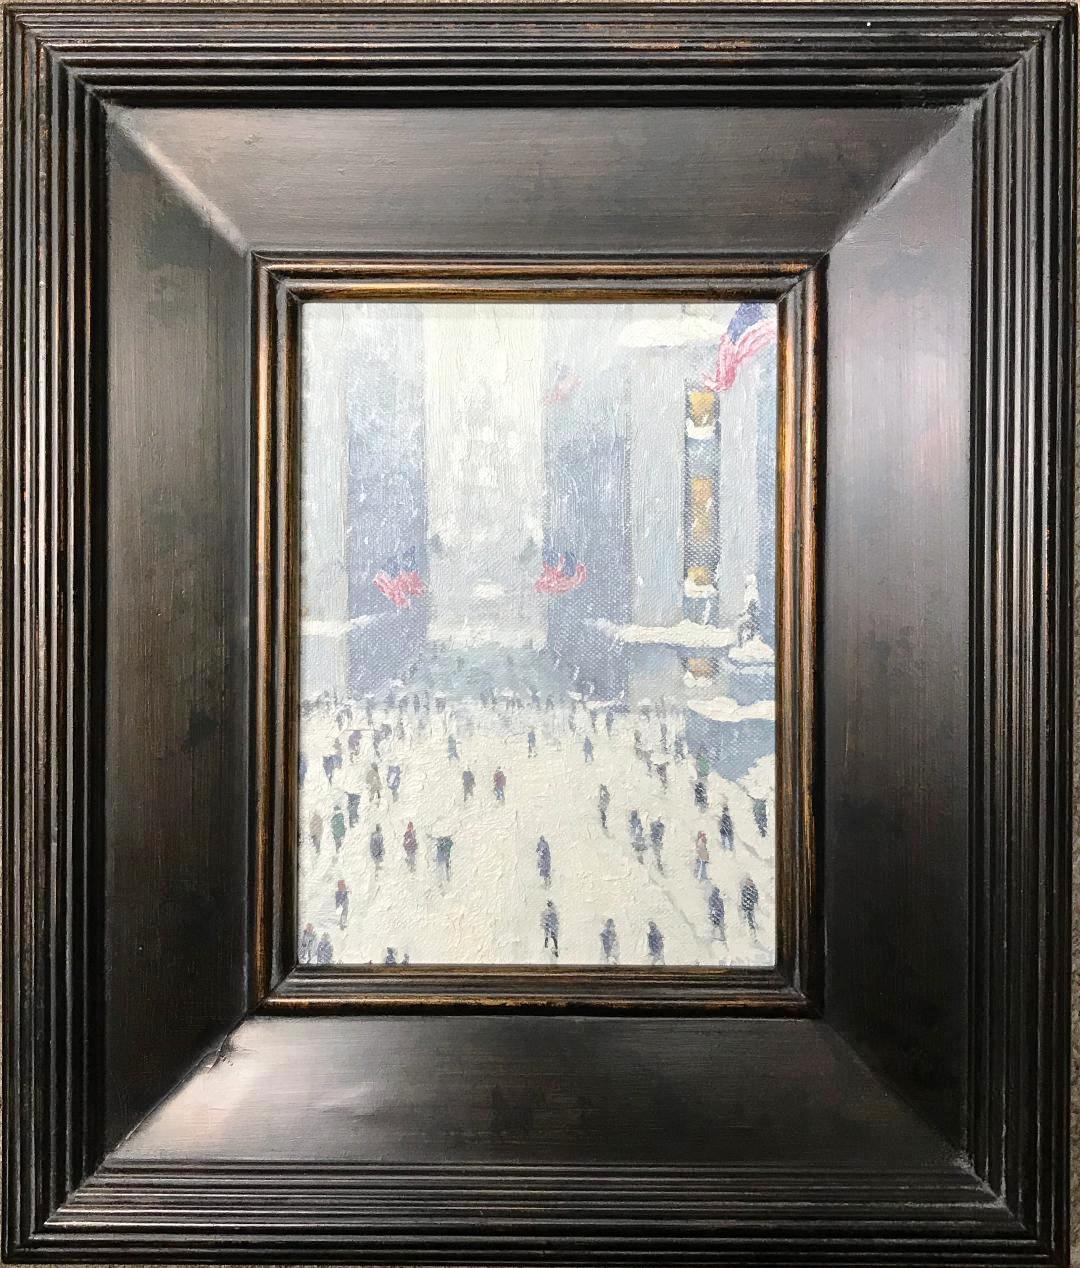 Winter Wall Street, American Flags is an oil painting on panel by award winning contemporary artist Michael Budden that showcases the bustling life and a beautiful winter afternoon in New York City with a view of the iconic Trinity Church and Wall